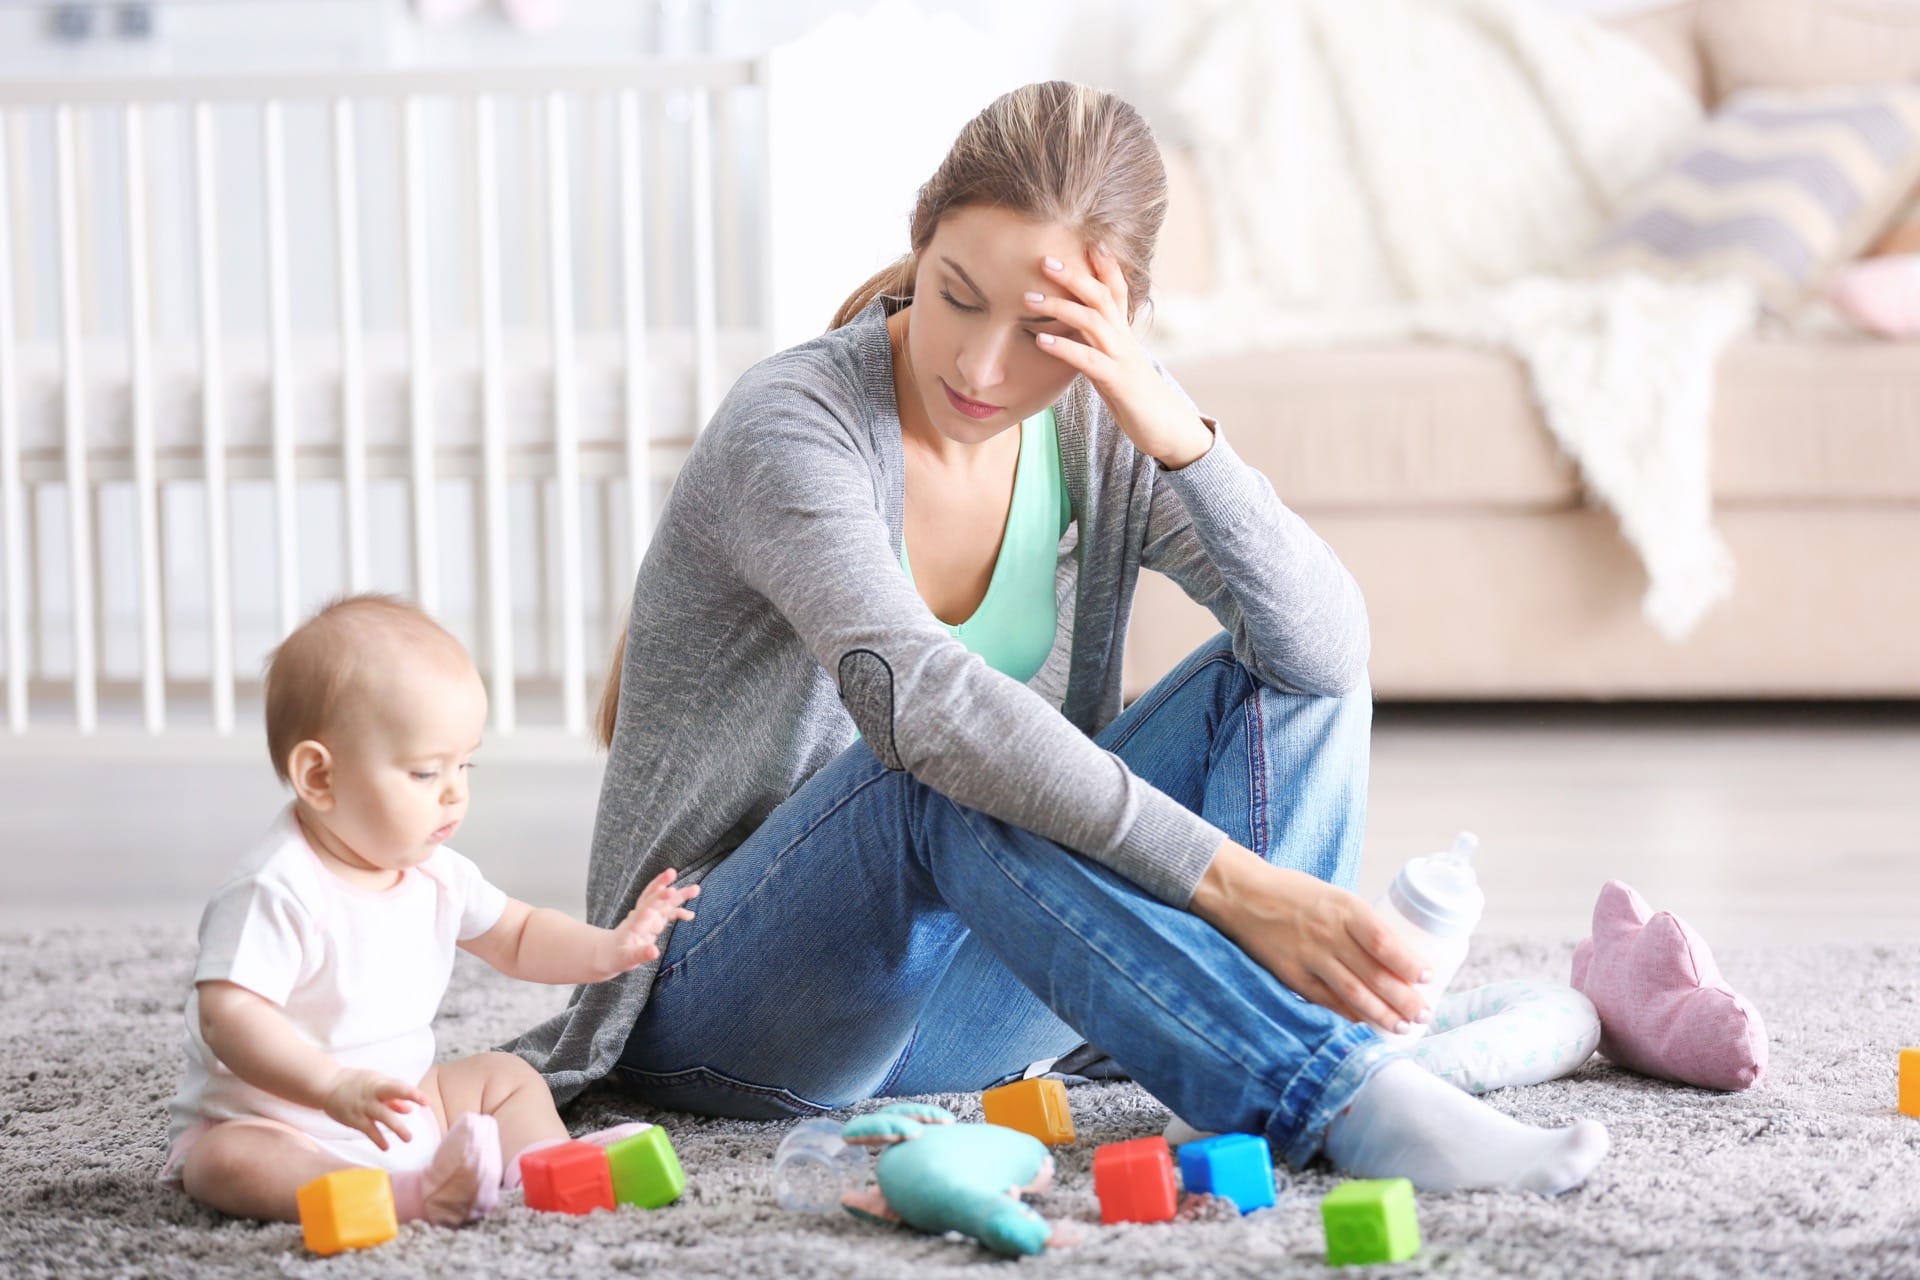 12 Signs You Could be Suffering From Postnatal Depression